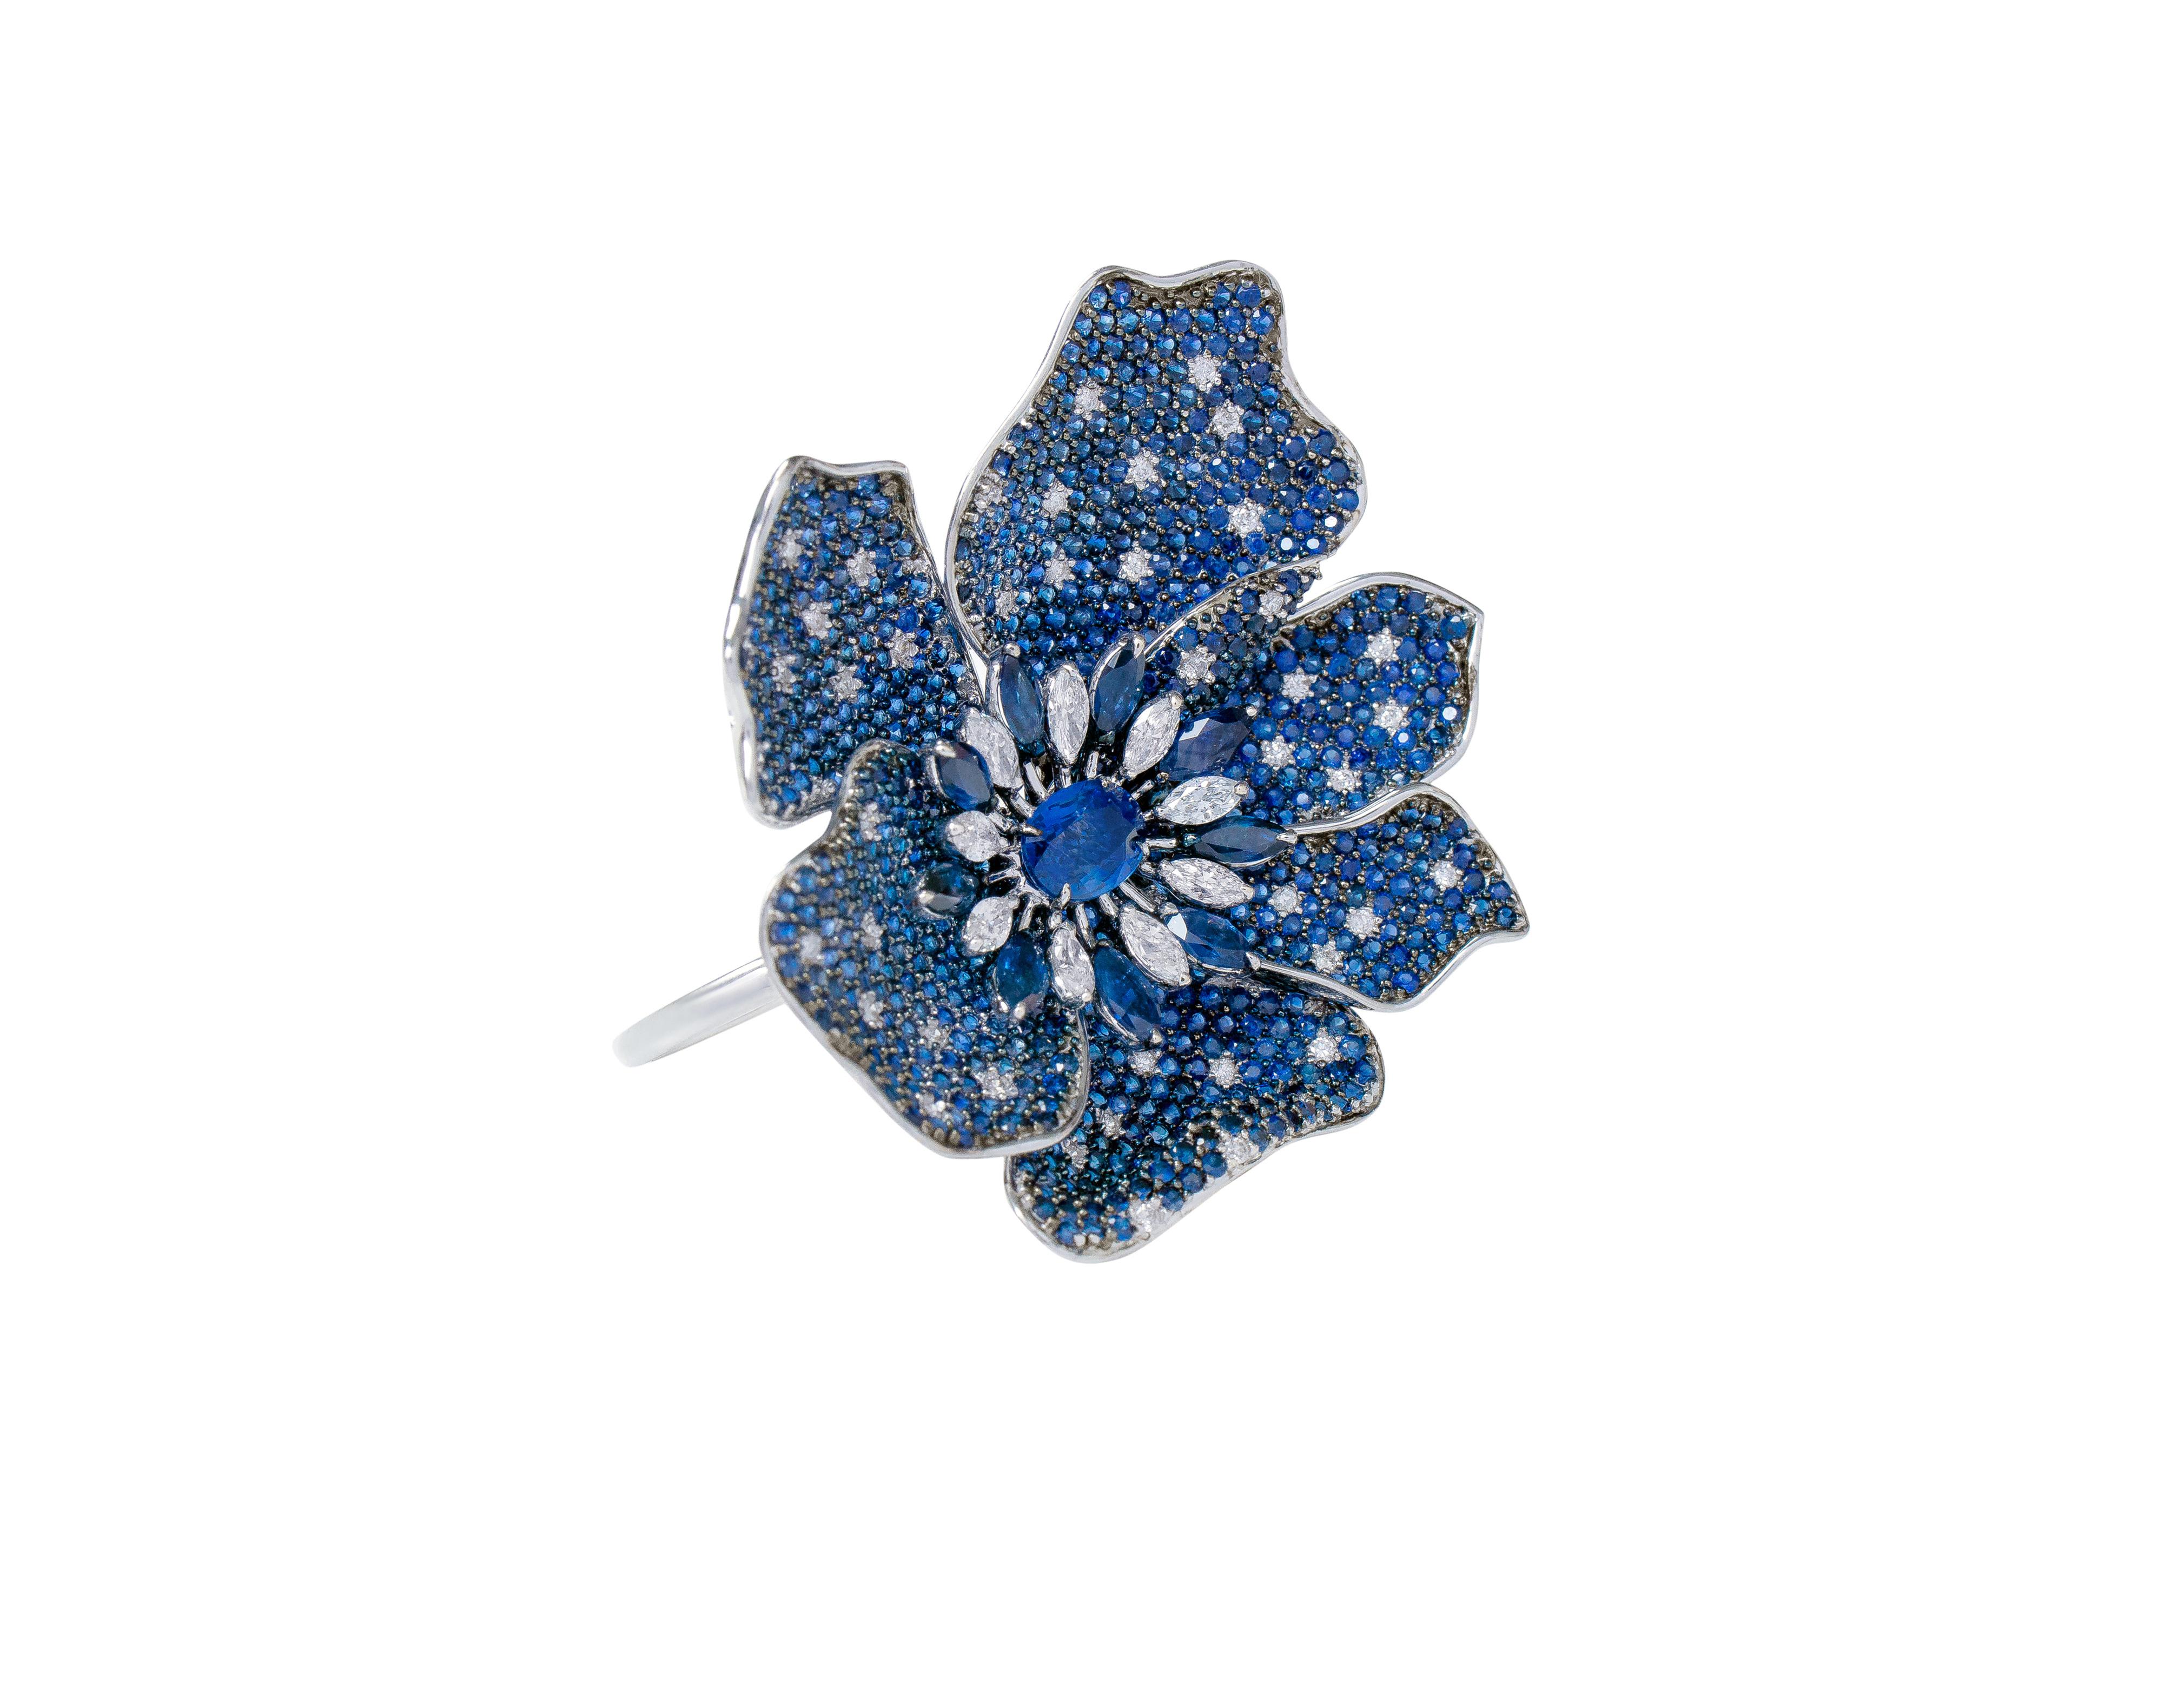 18 Karat White Gold 16.23 Carat Sapphire Flower Two-Finger Statement Ring

This magnanimous cocktail royal blue sapphire ring is a beauty to behold. This design is inspired by our love of nature and flowers with the petals blossoming out to show its